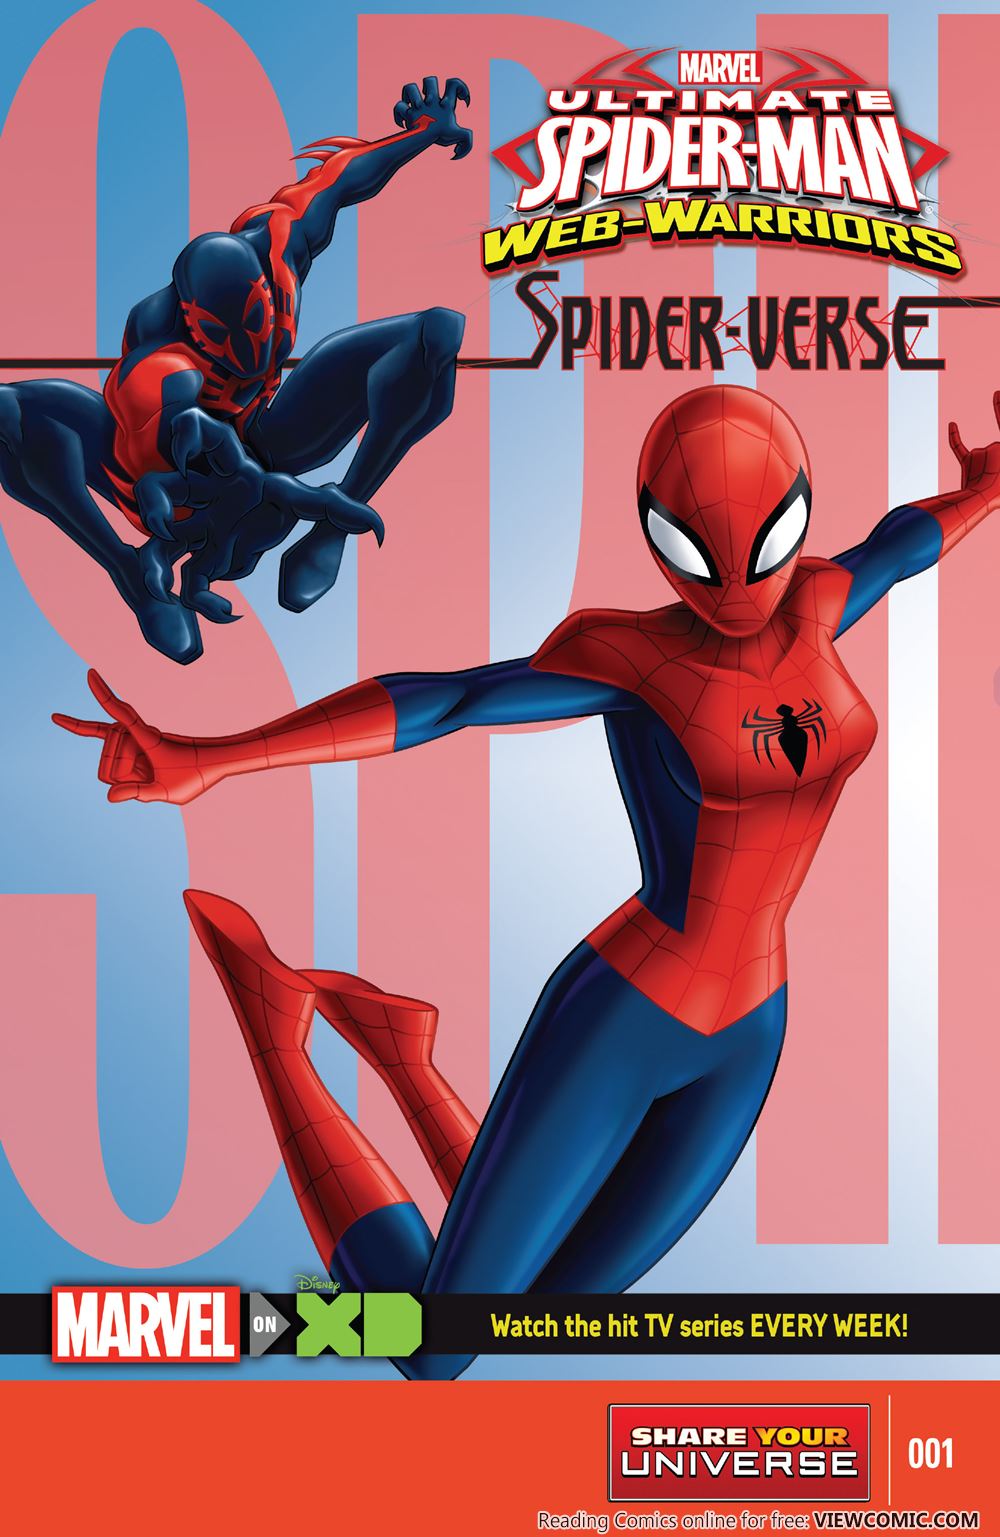 Sex Ultimate Spider Man - Marvel Universe Ultimate Spider Man Web Warriors Spider Verse 001 2016 |  Read Marvel Universe Ultimate Spider Man Web Warriors Spider Verse 001 2016  comic online in high quality. Read Full Comic